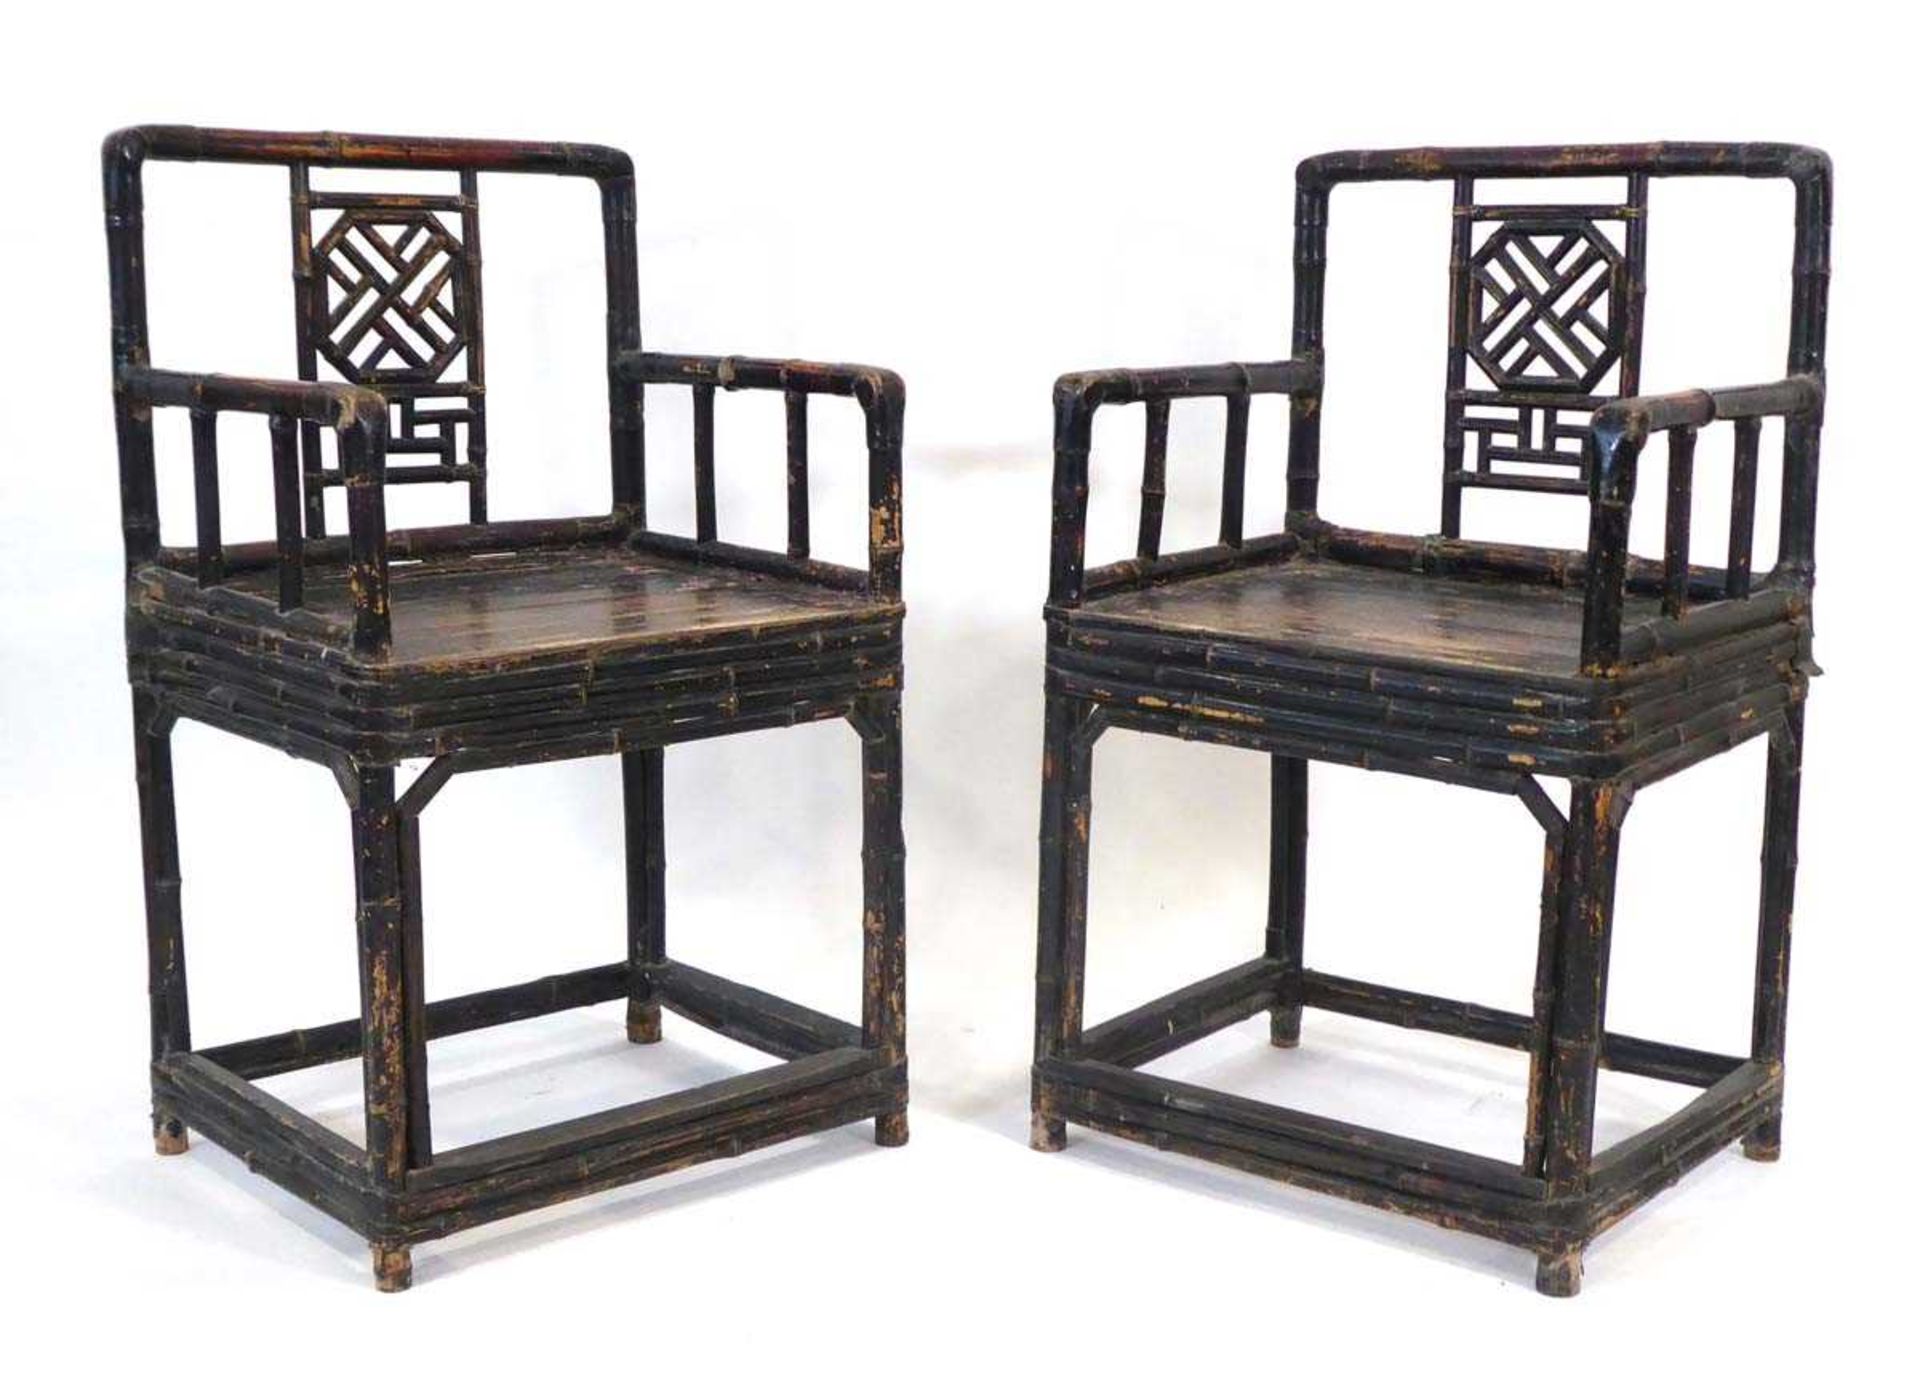 A pair of Chinese bamboo and lacquered elbow chairs with decorative trellis splats, solid seats